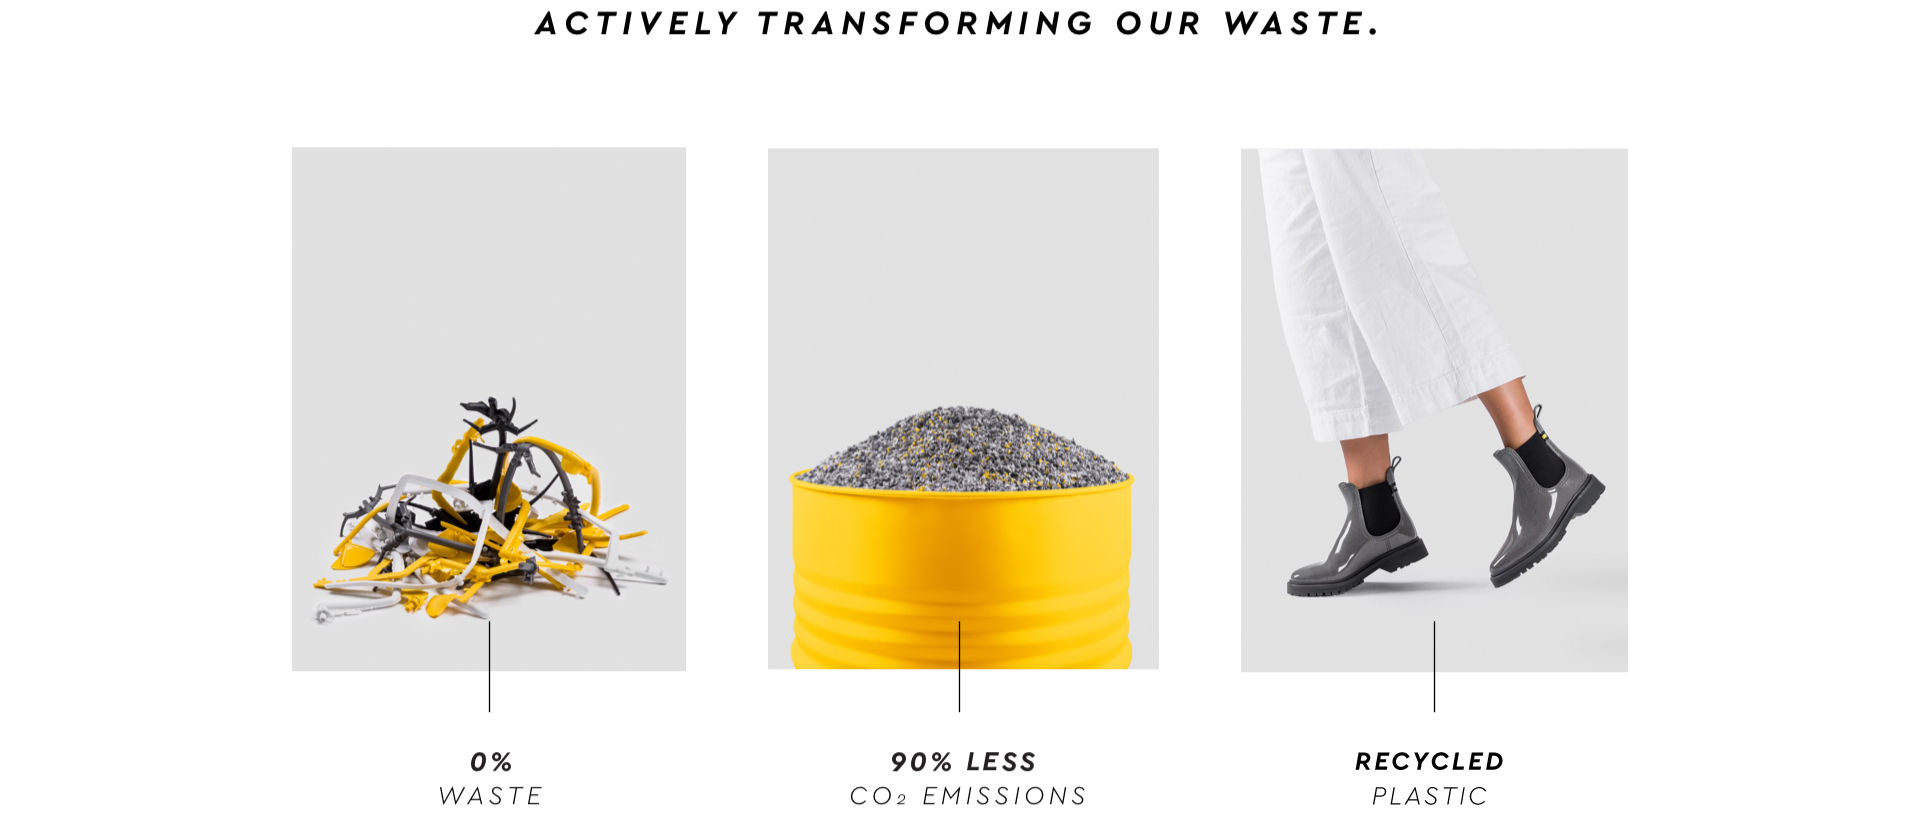 Actively transforming our waste